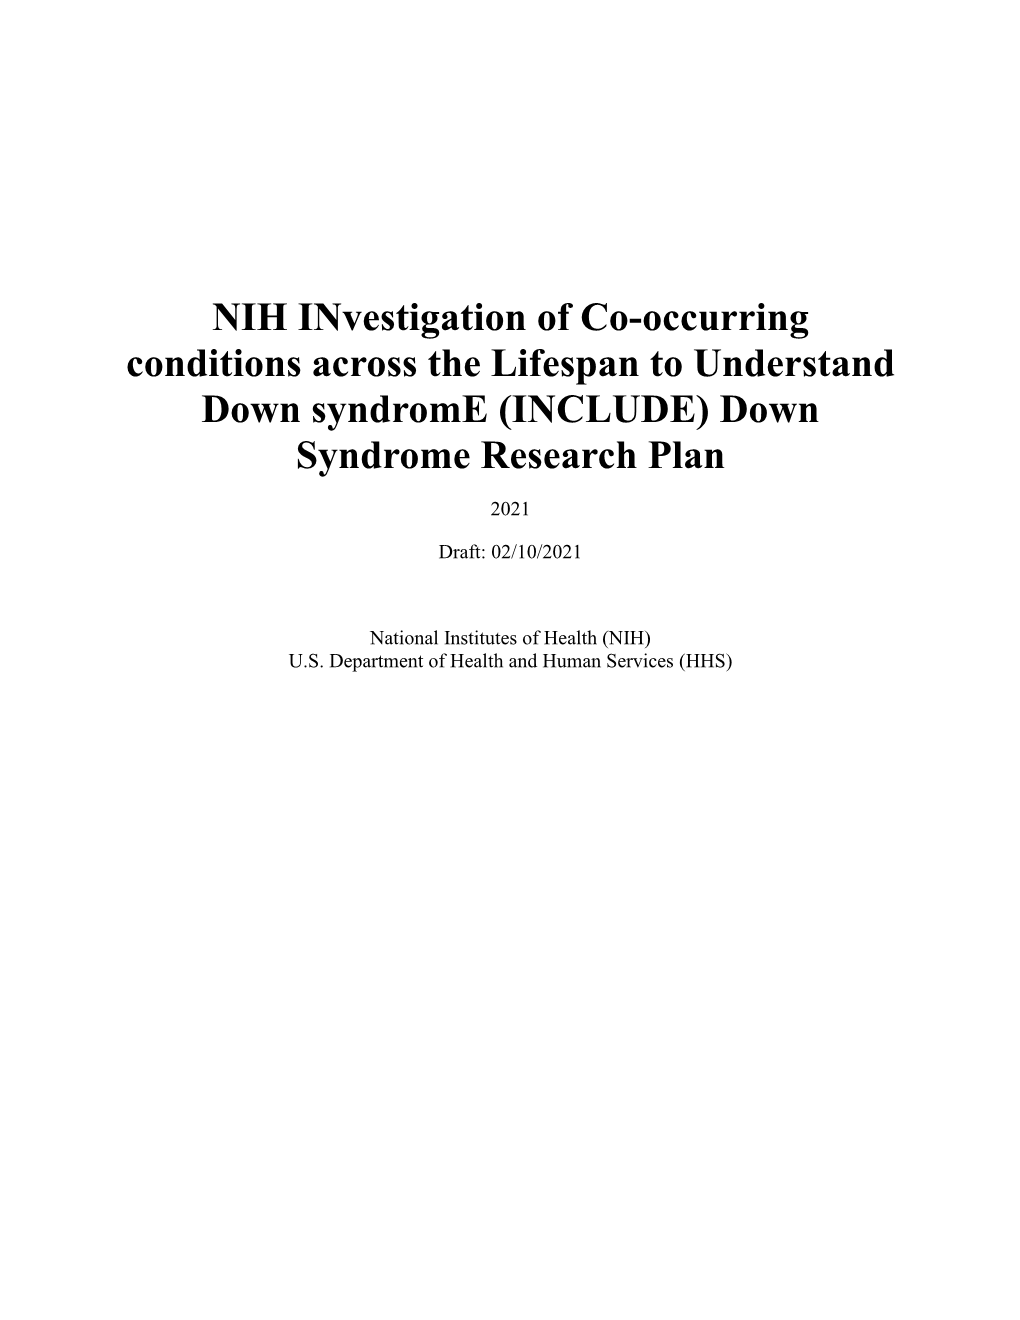 The Draft of the NIH INCLUDE Down Syndrome Research Plan